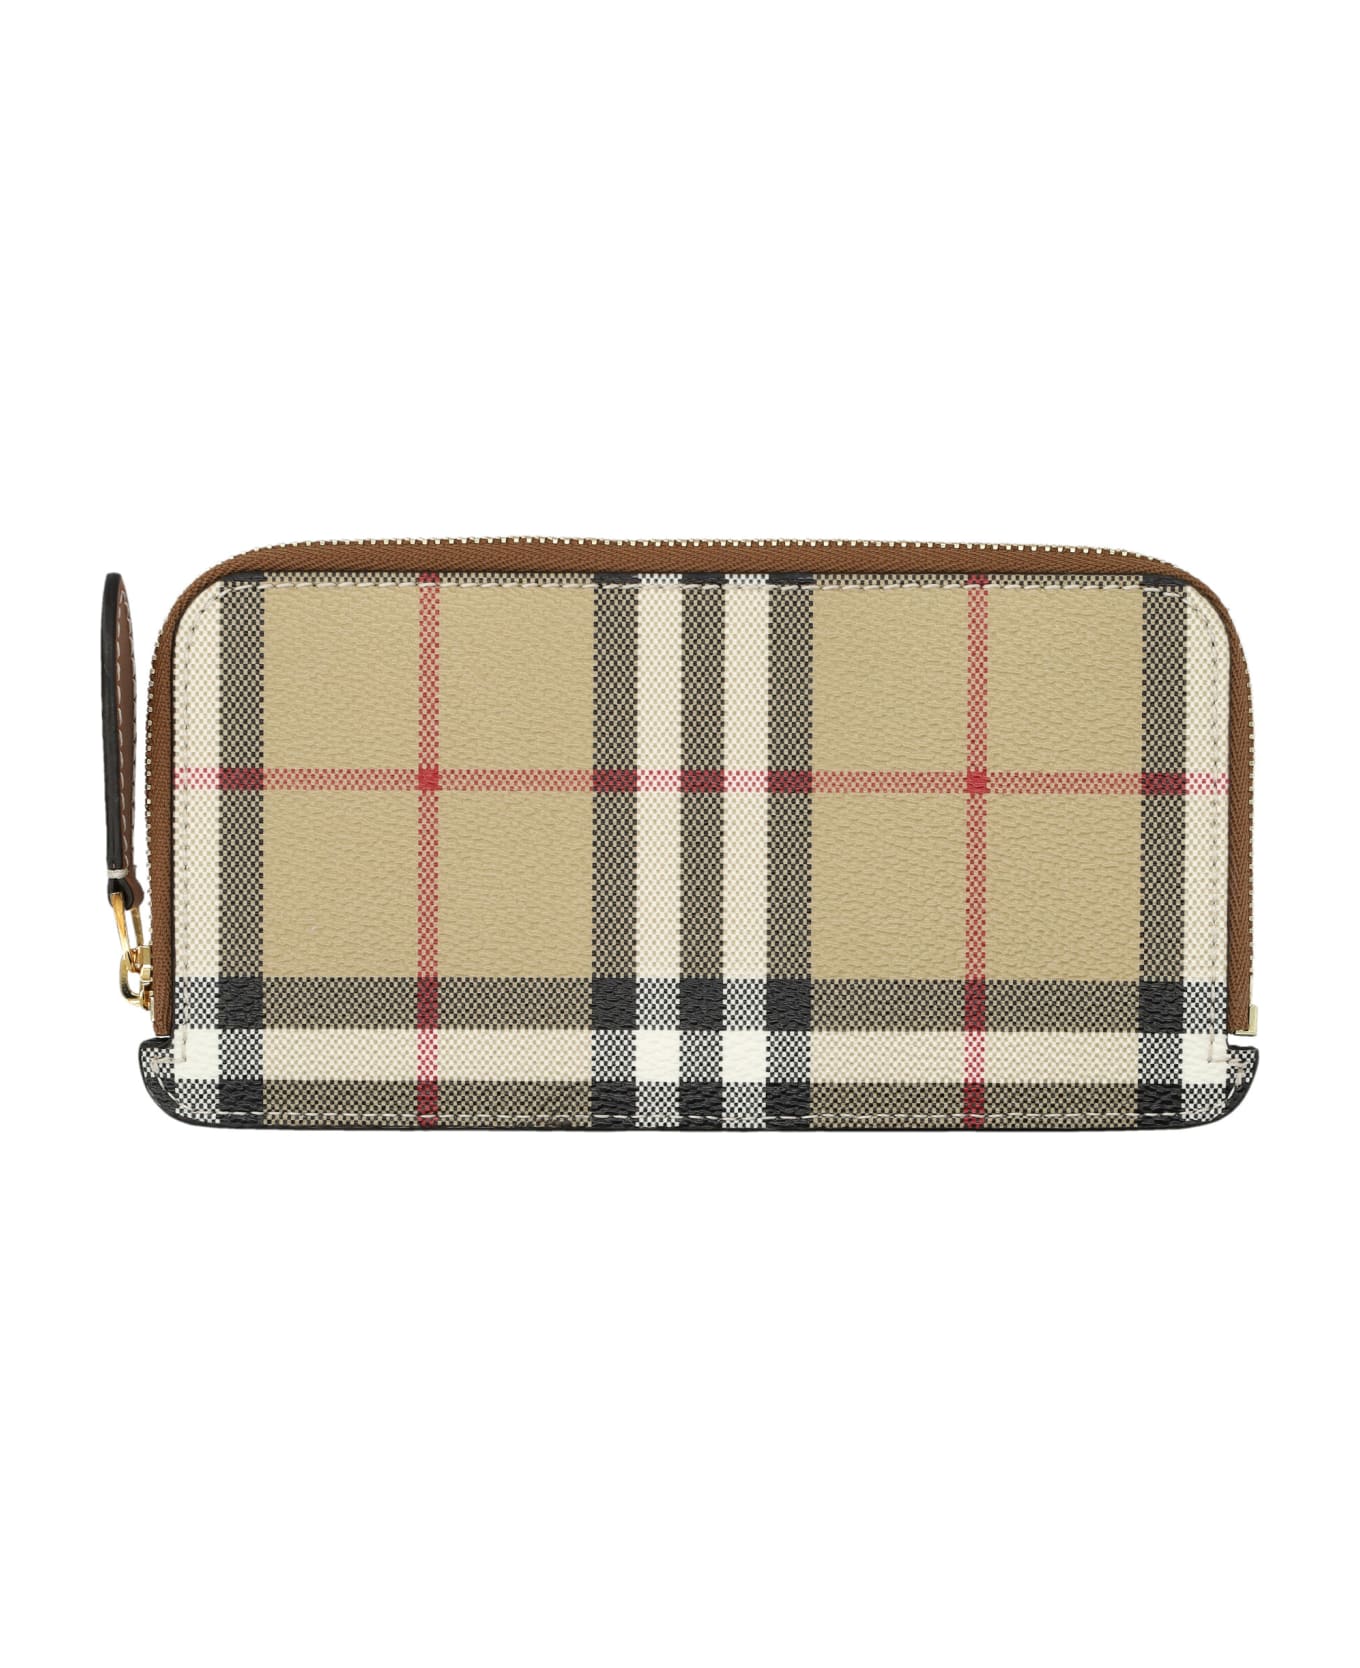 Burberry London Long Somerset Wallet - ARCHIVE BEIGE CHECK